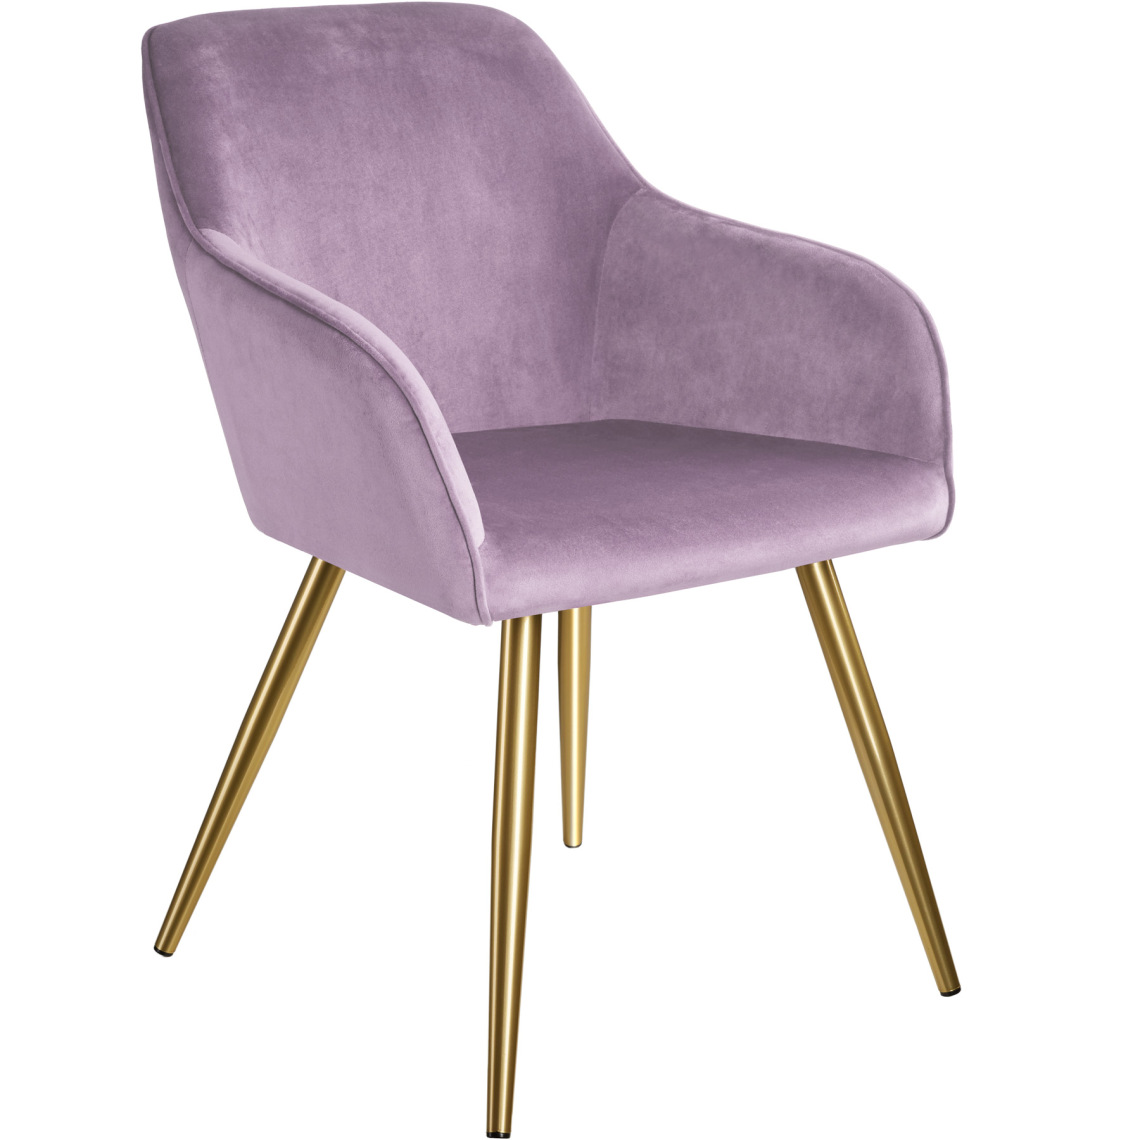 Tectake - Chaise MARILYN Effet Velours Style Scandinave - violet clair/or - Chaises